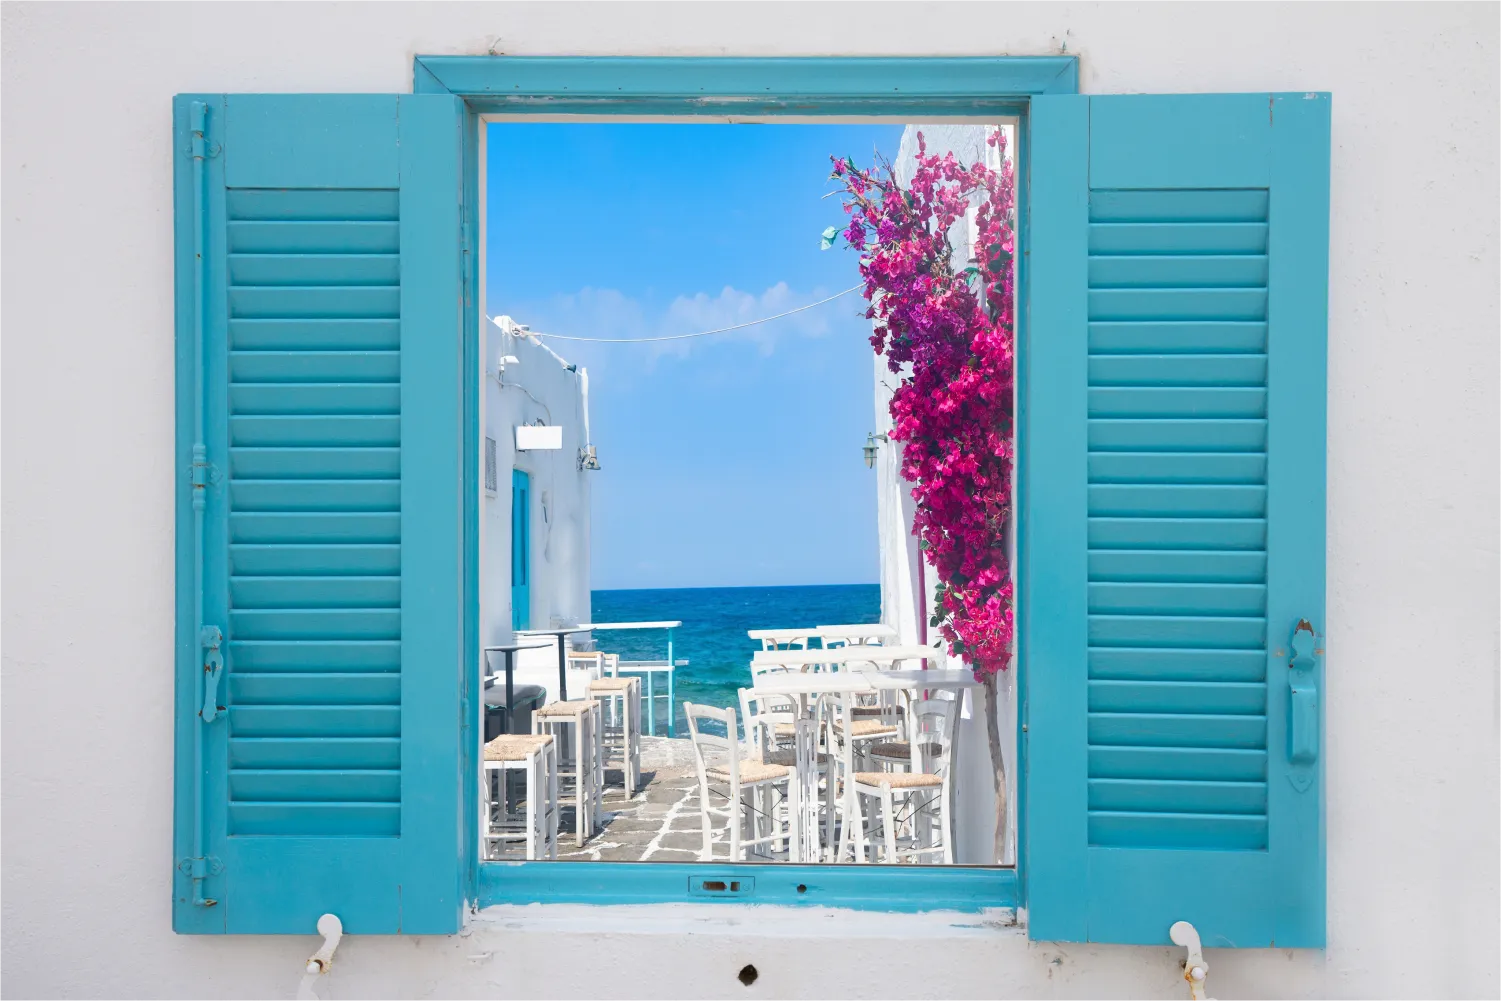 General Typical Coloful White Street Of Paros Island Greece View Through The Window image